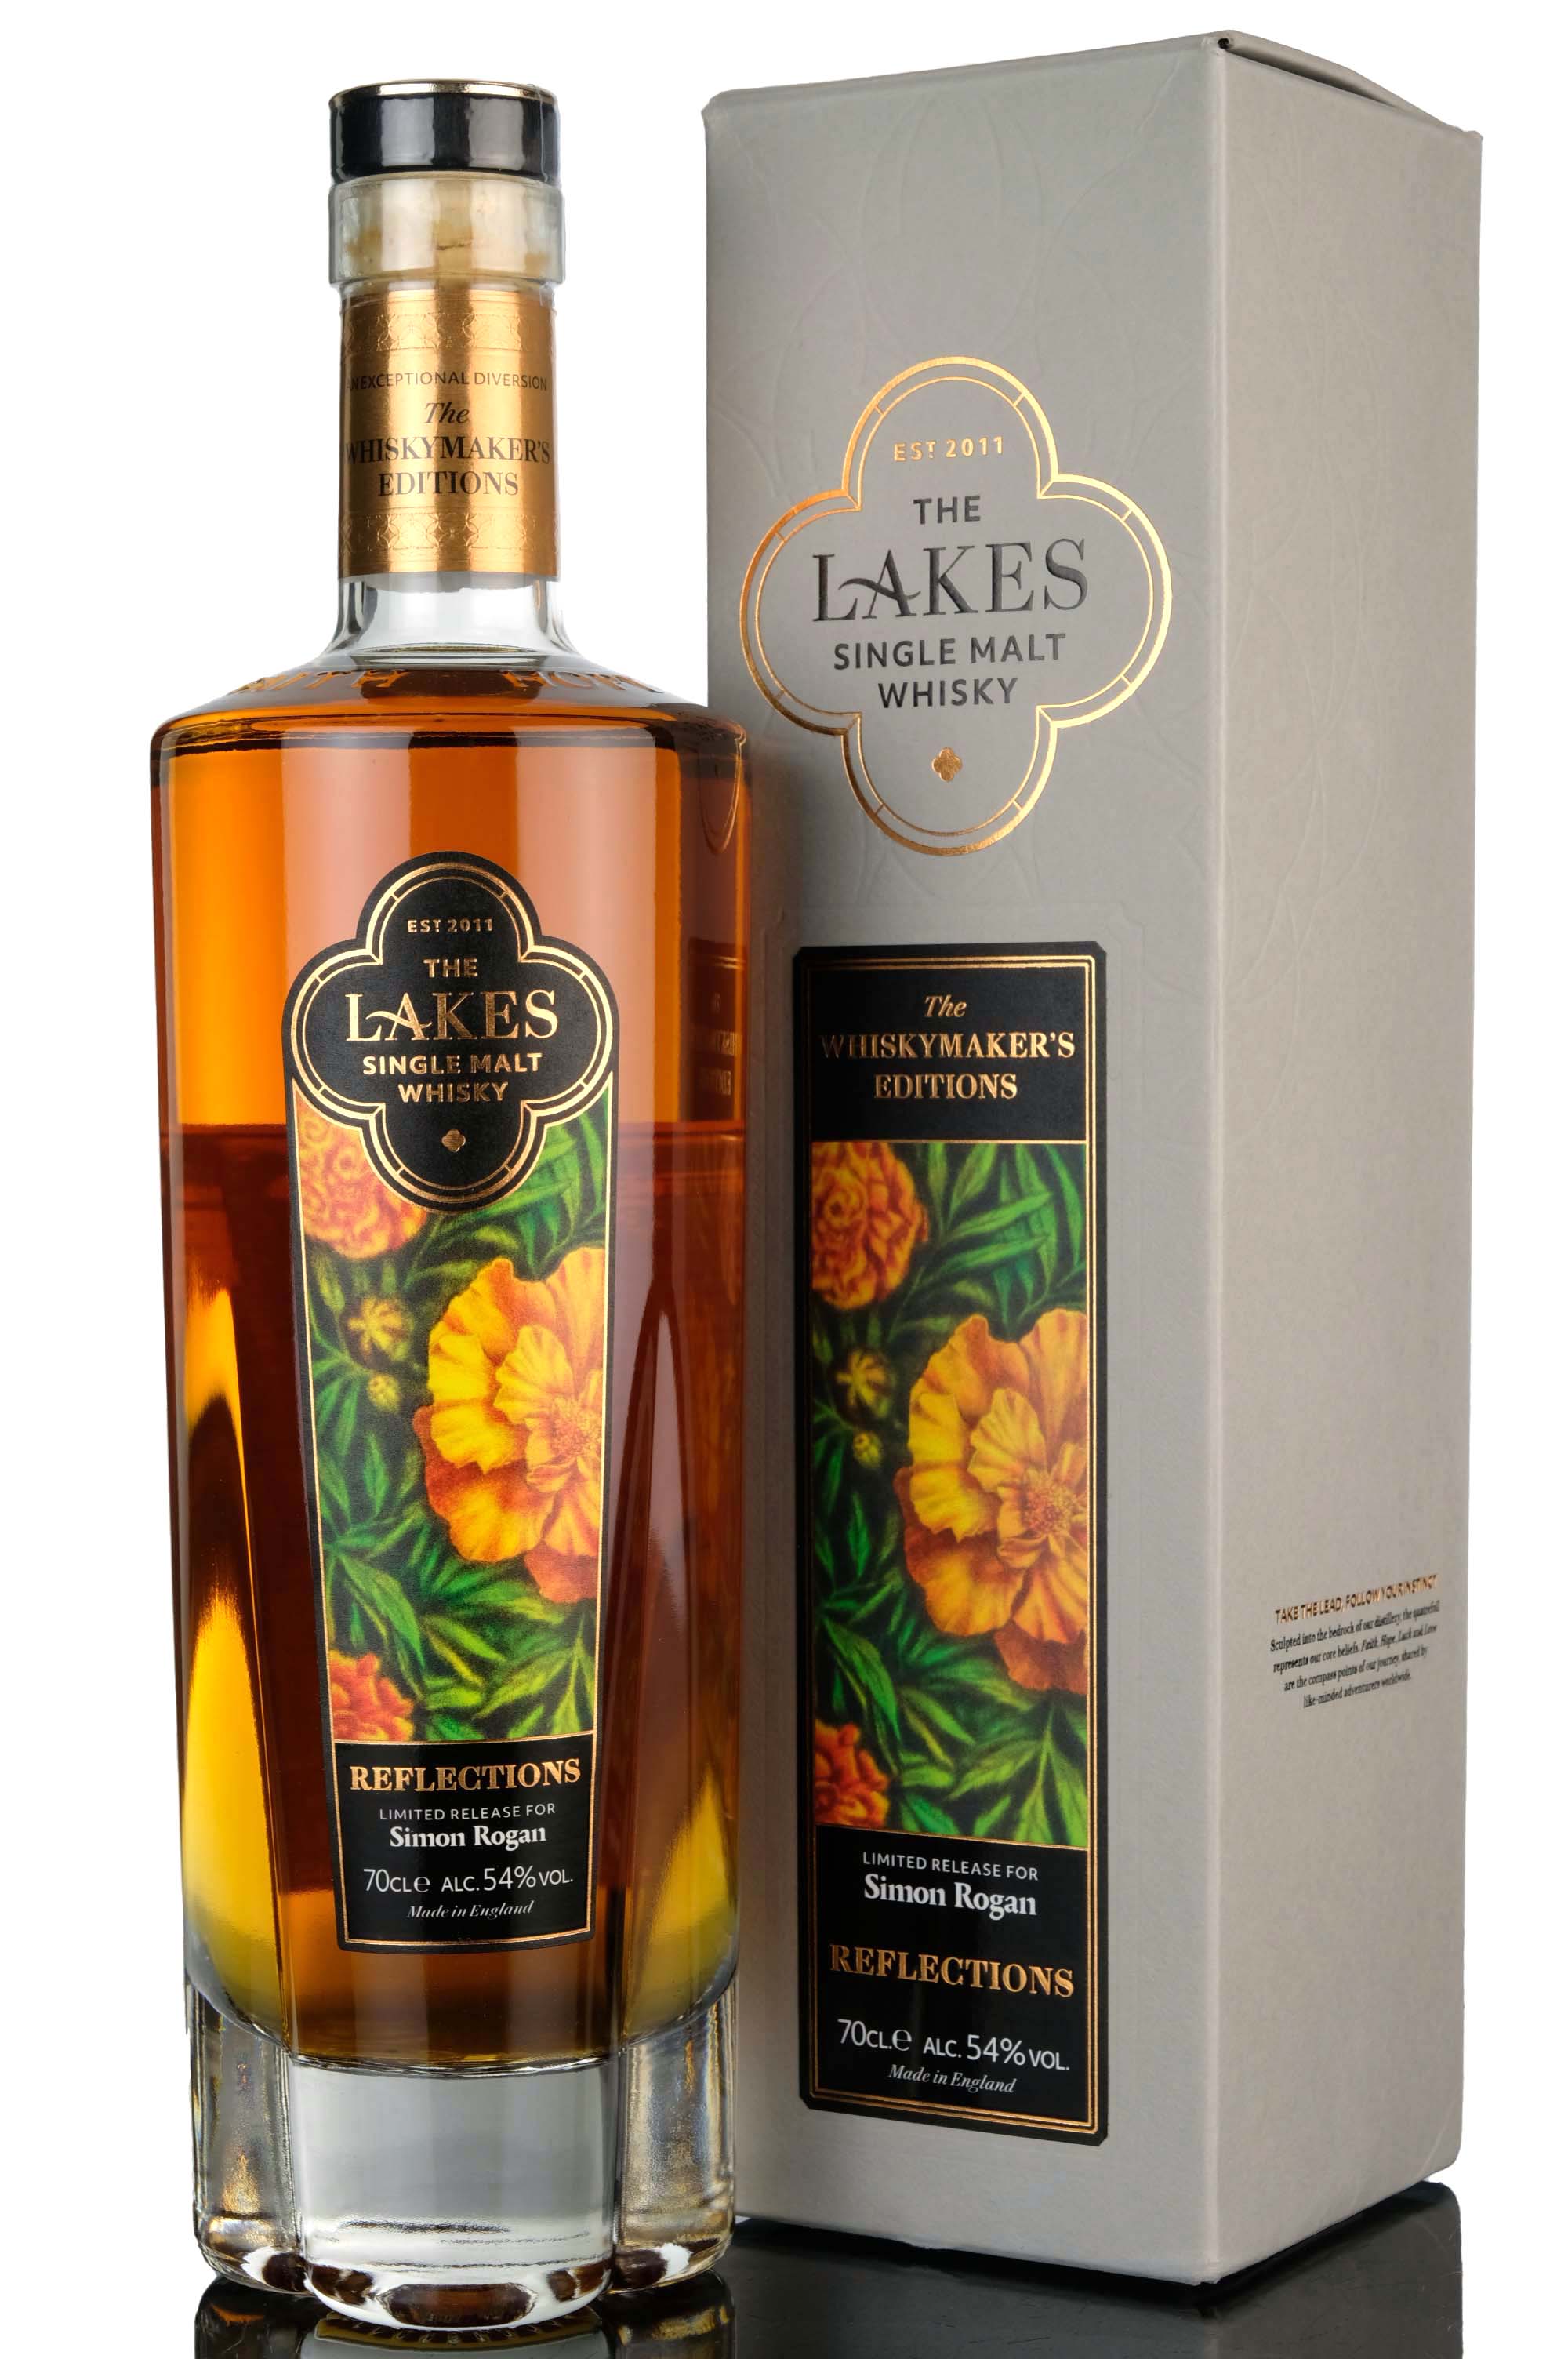 The Lakes Distillery The Whiskymakers Editions Reflections For Simon Rogan - 2022 Release